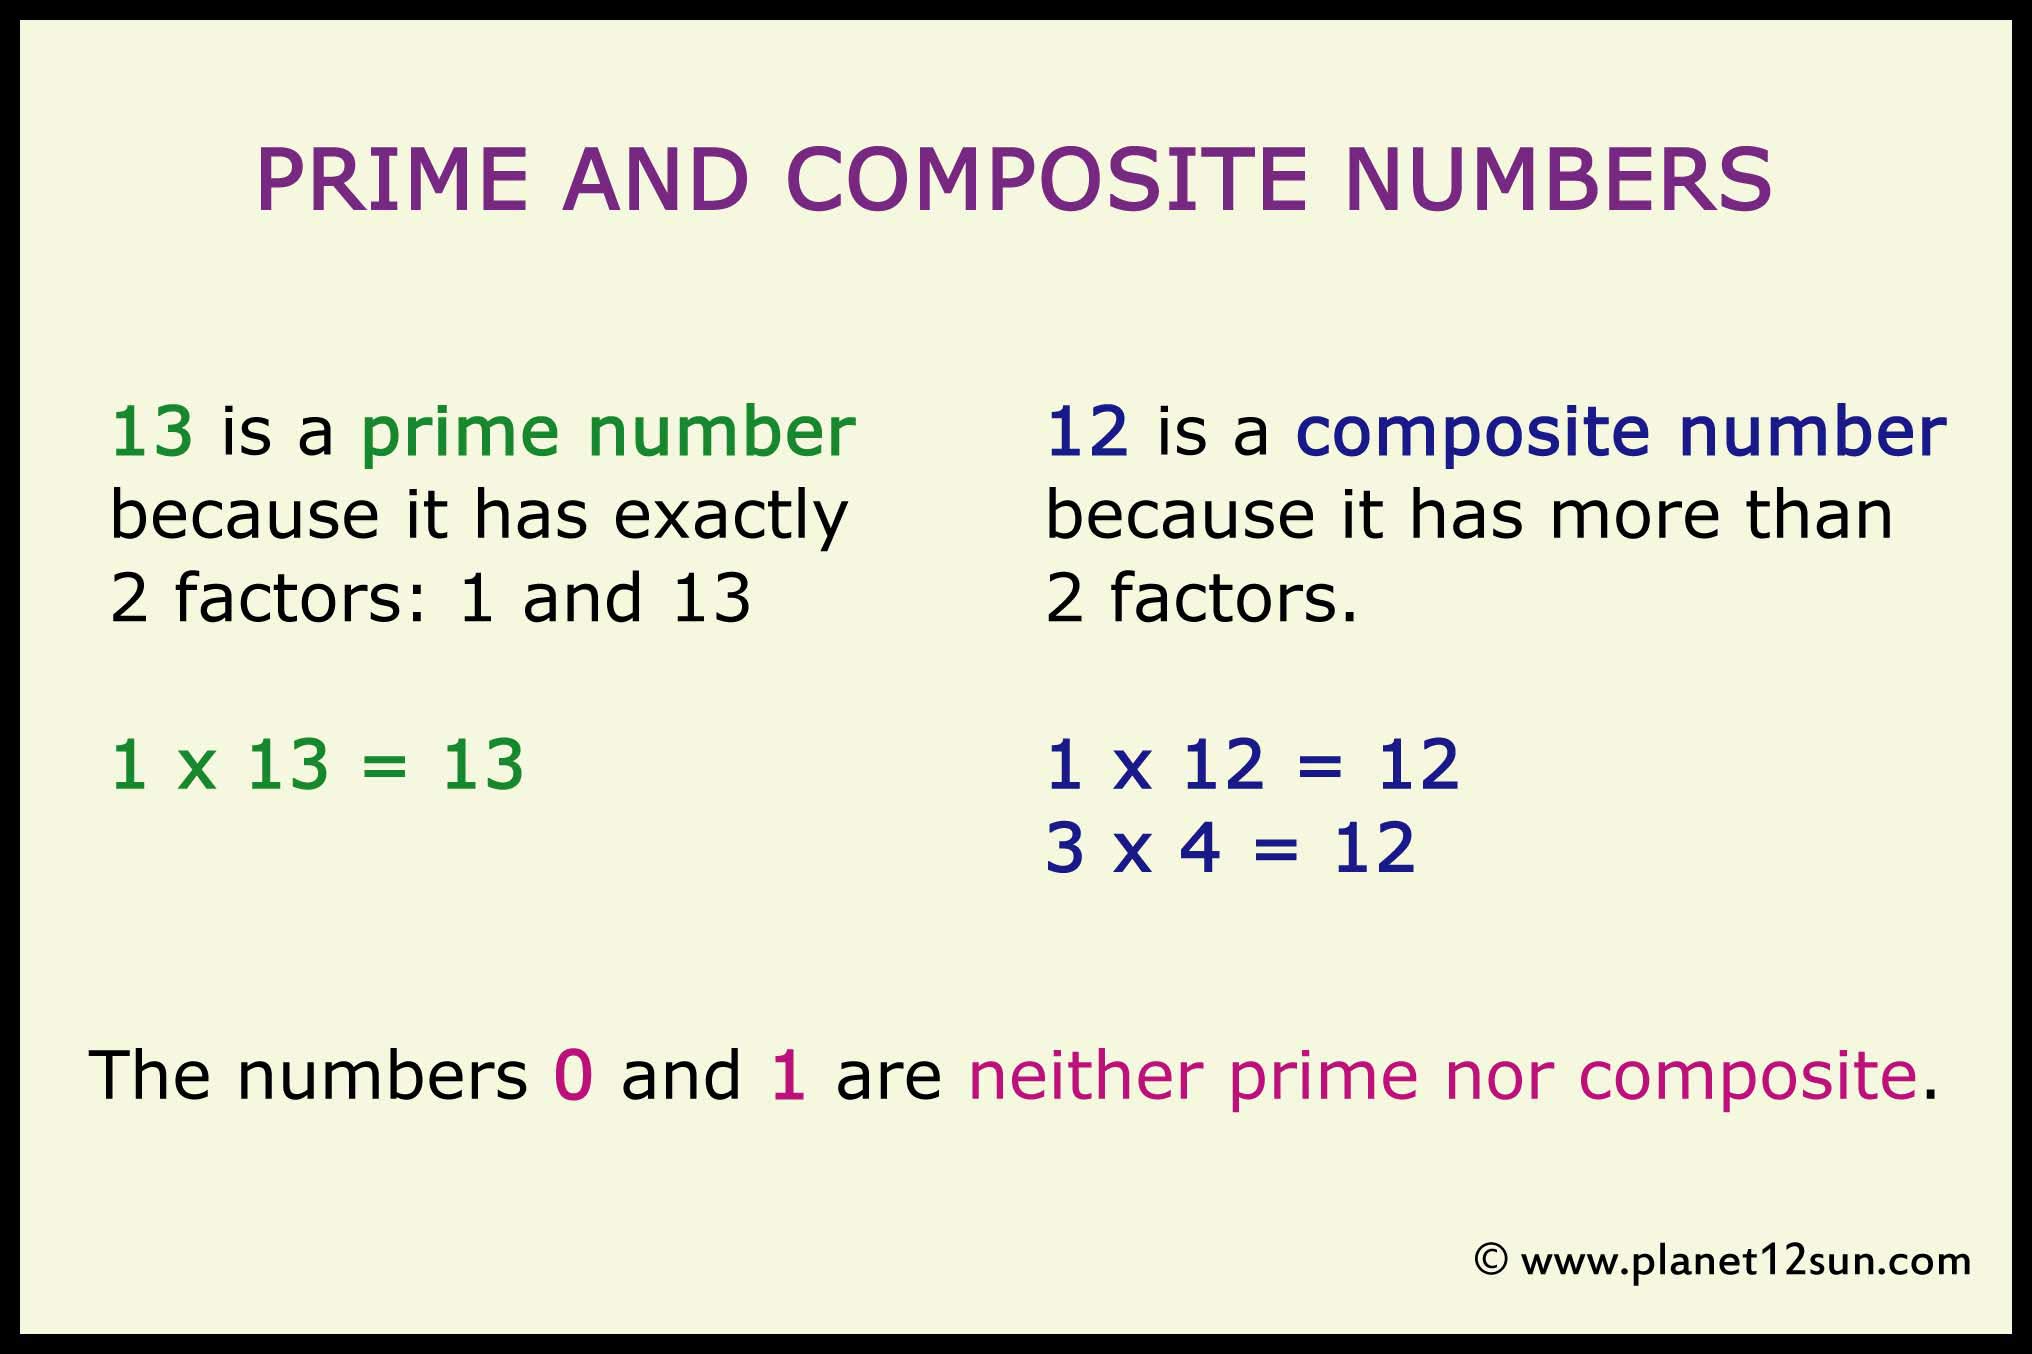 my homework lesson 2 prime and composite numbers